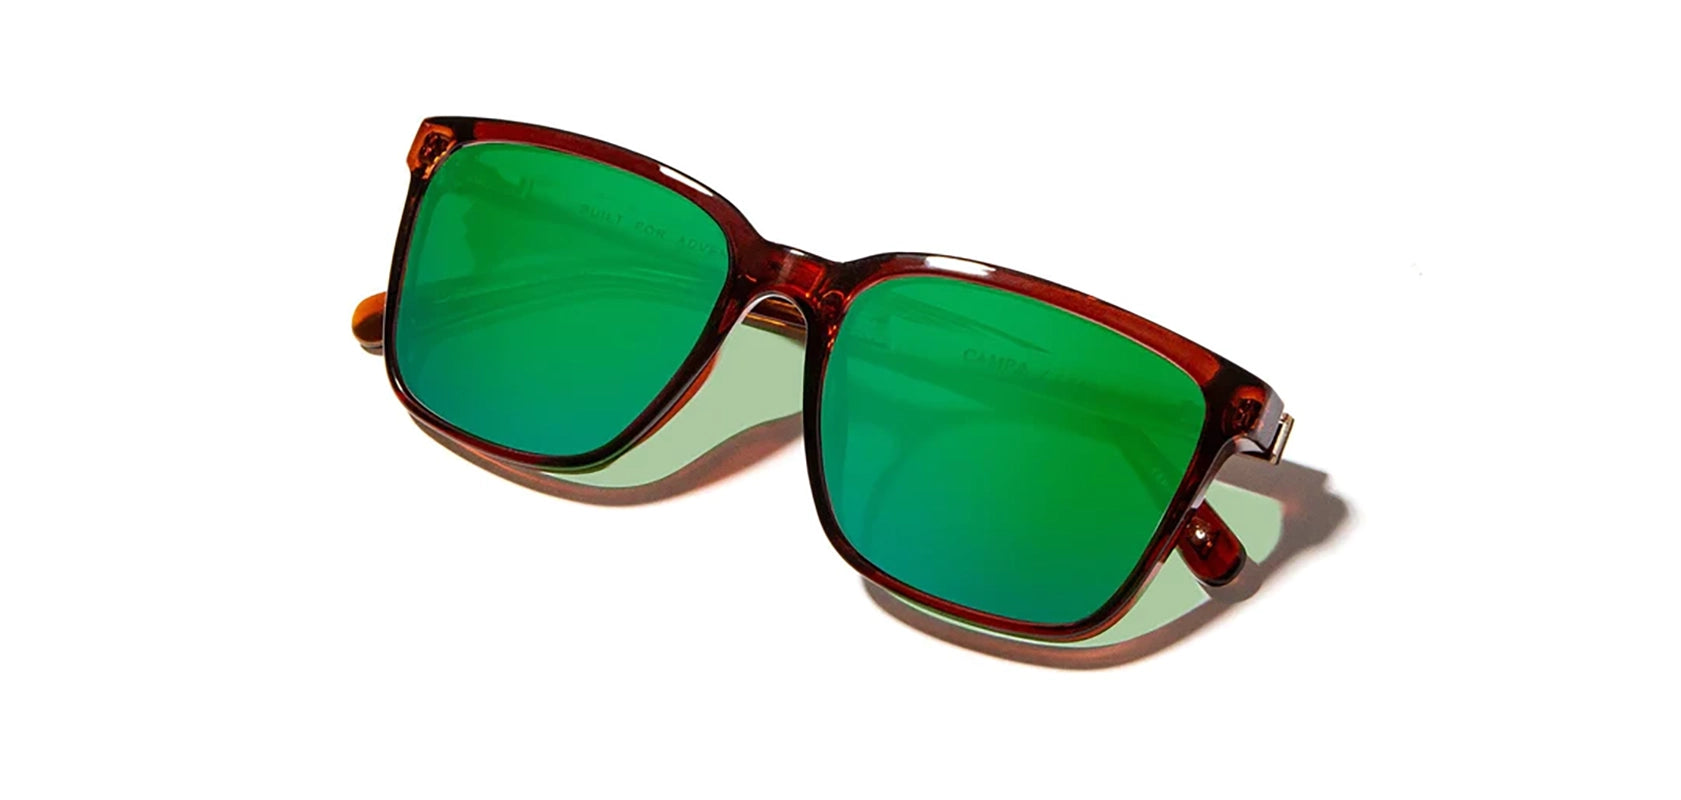 Camp Clay / Walnut Sunglasses with HD + Green Flash polarized Lenses front angled closed temple view